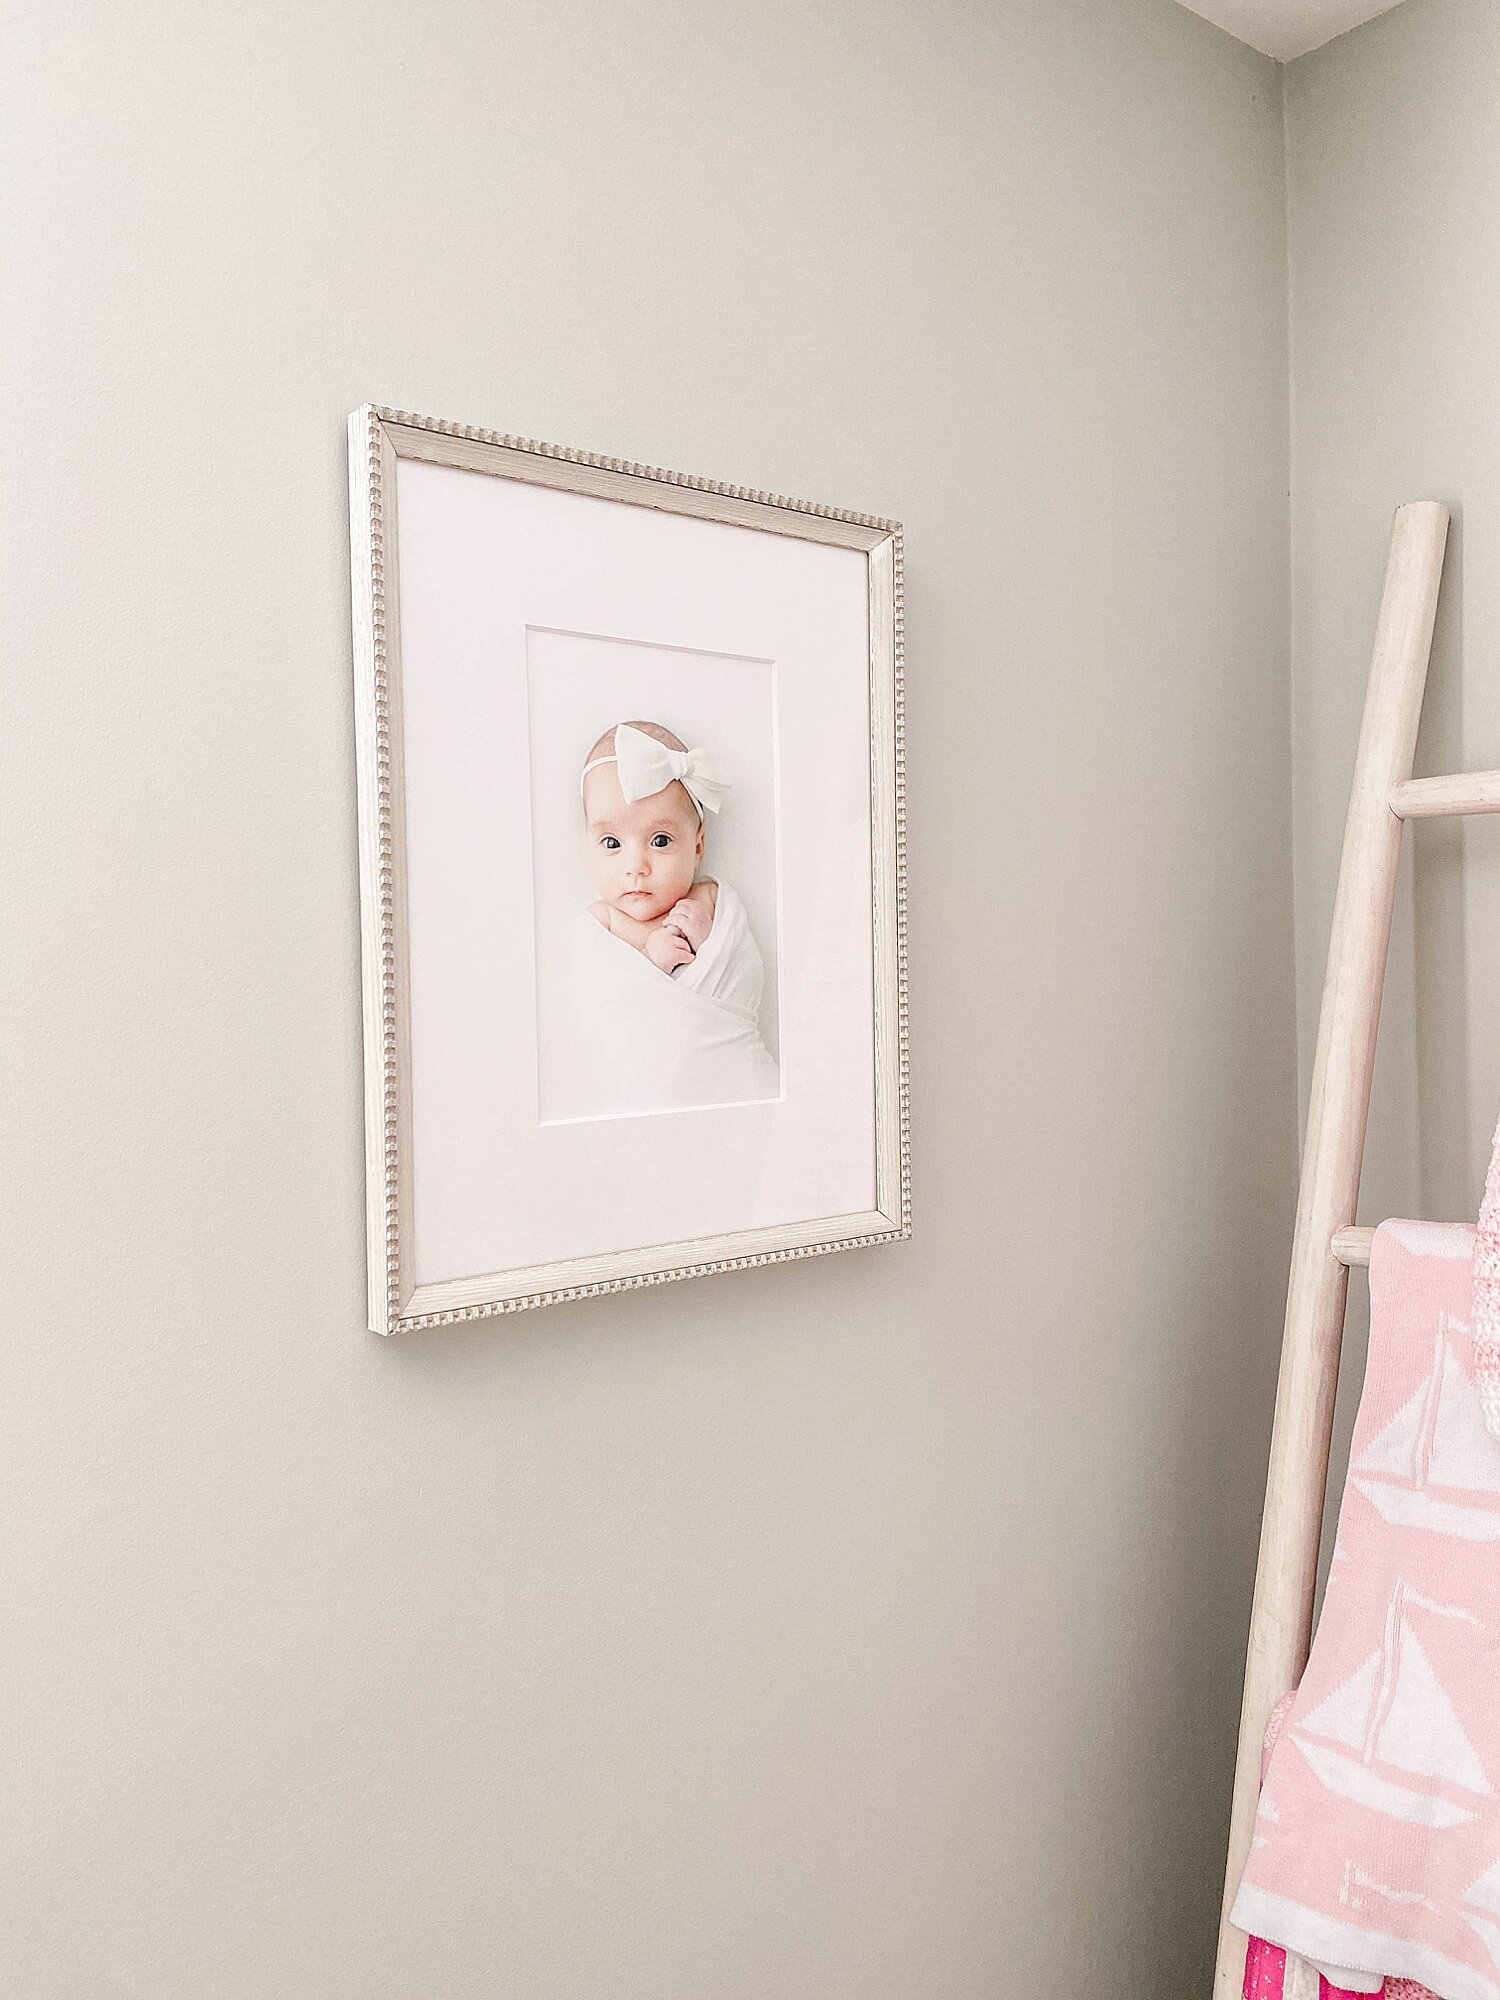 Beautiful newborn photos framed in baby's nursery. Photos and frame installation by Connecticut Newborn Photographer, Kristin Wood Photography.